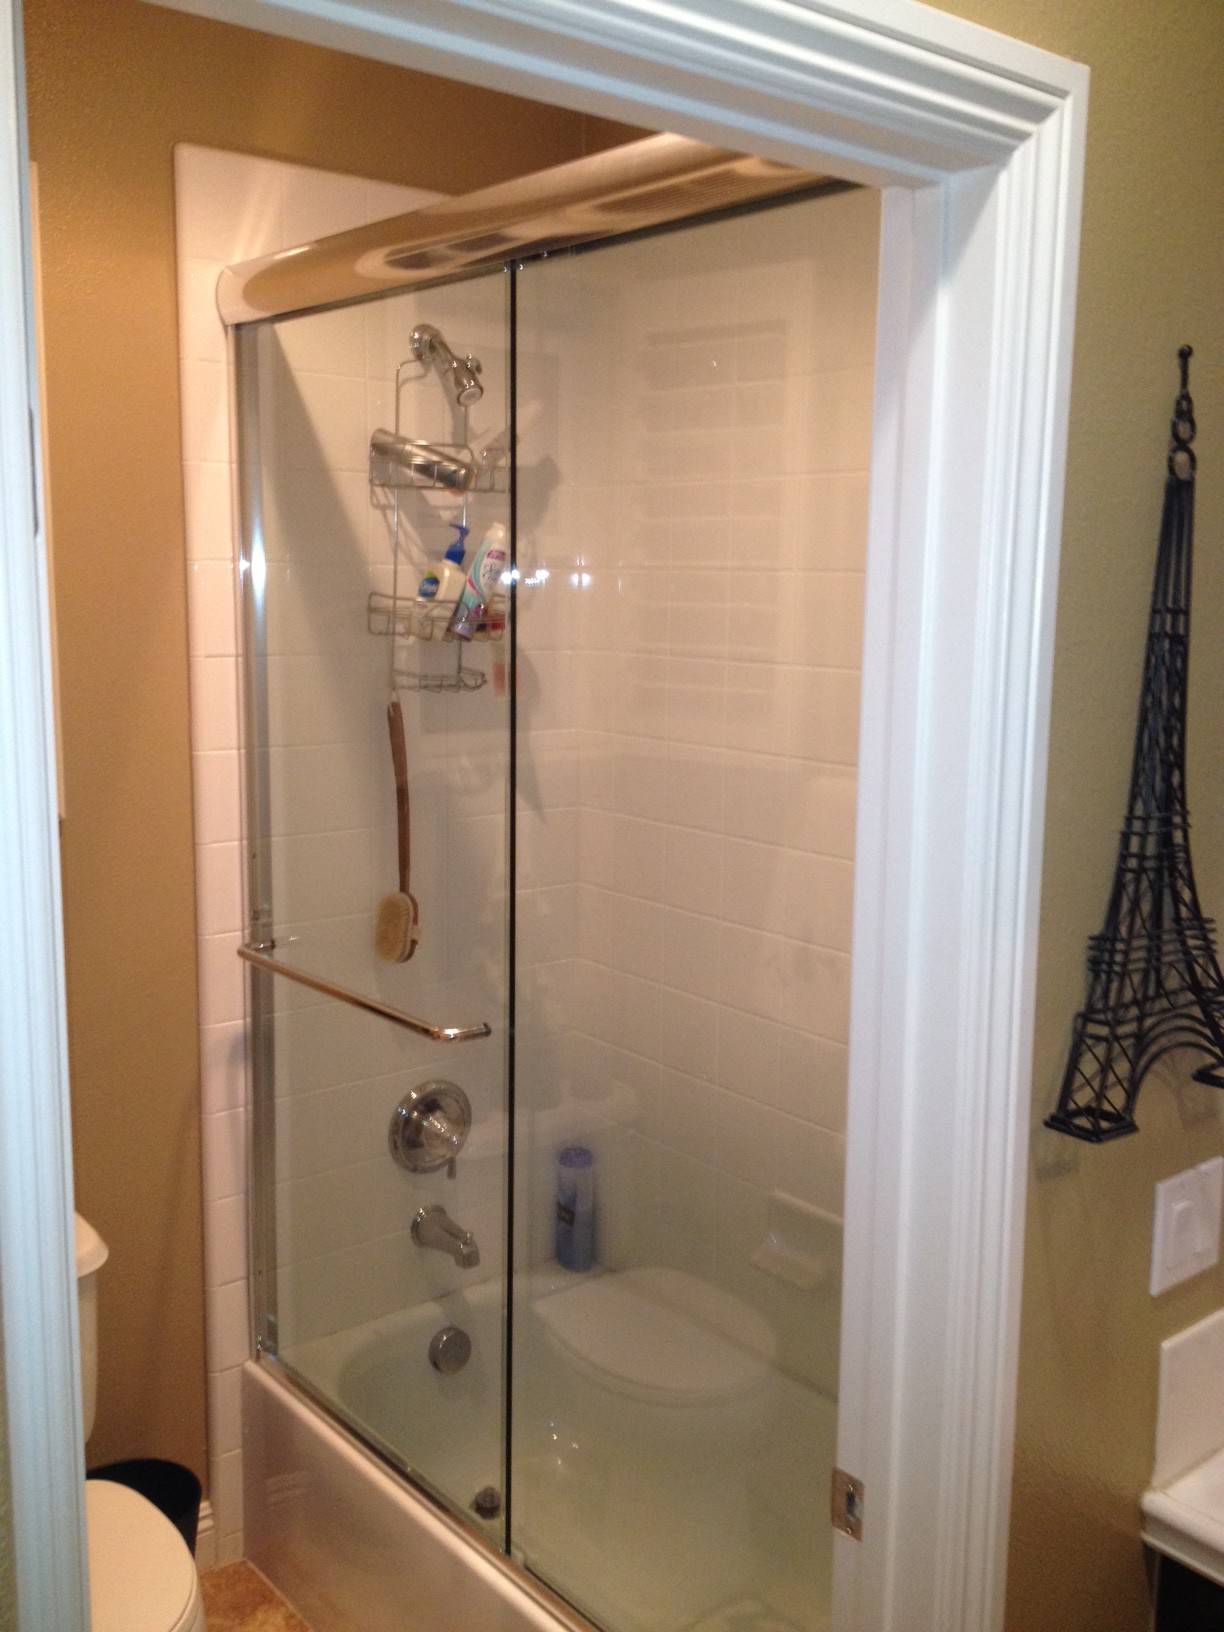 OnTrack installed a new glass shower door in this bathroom